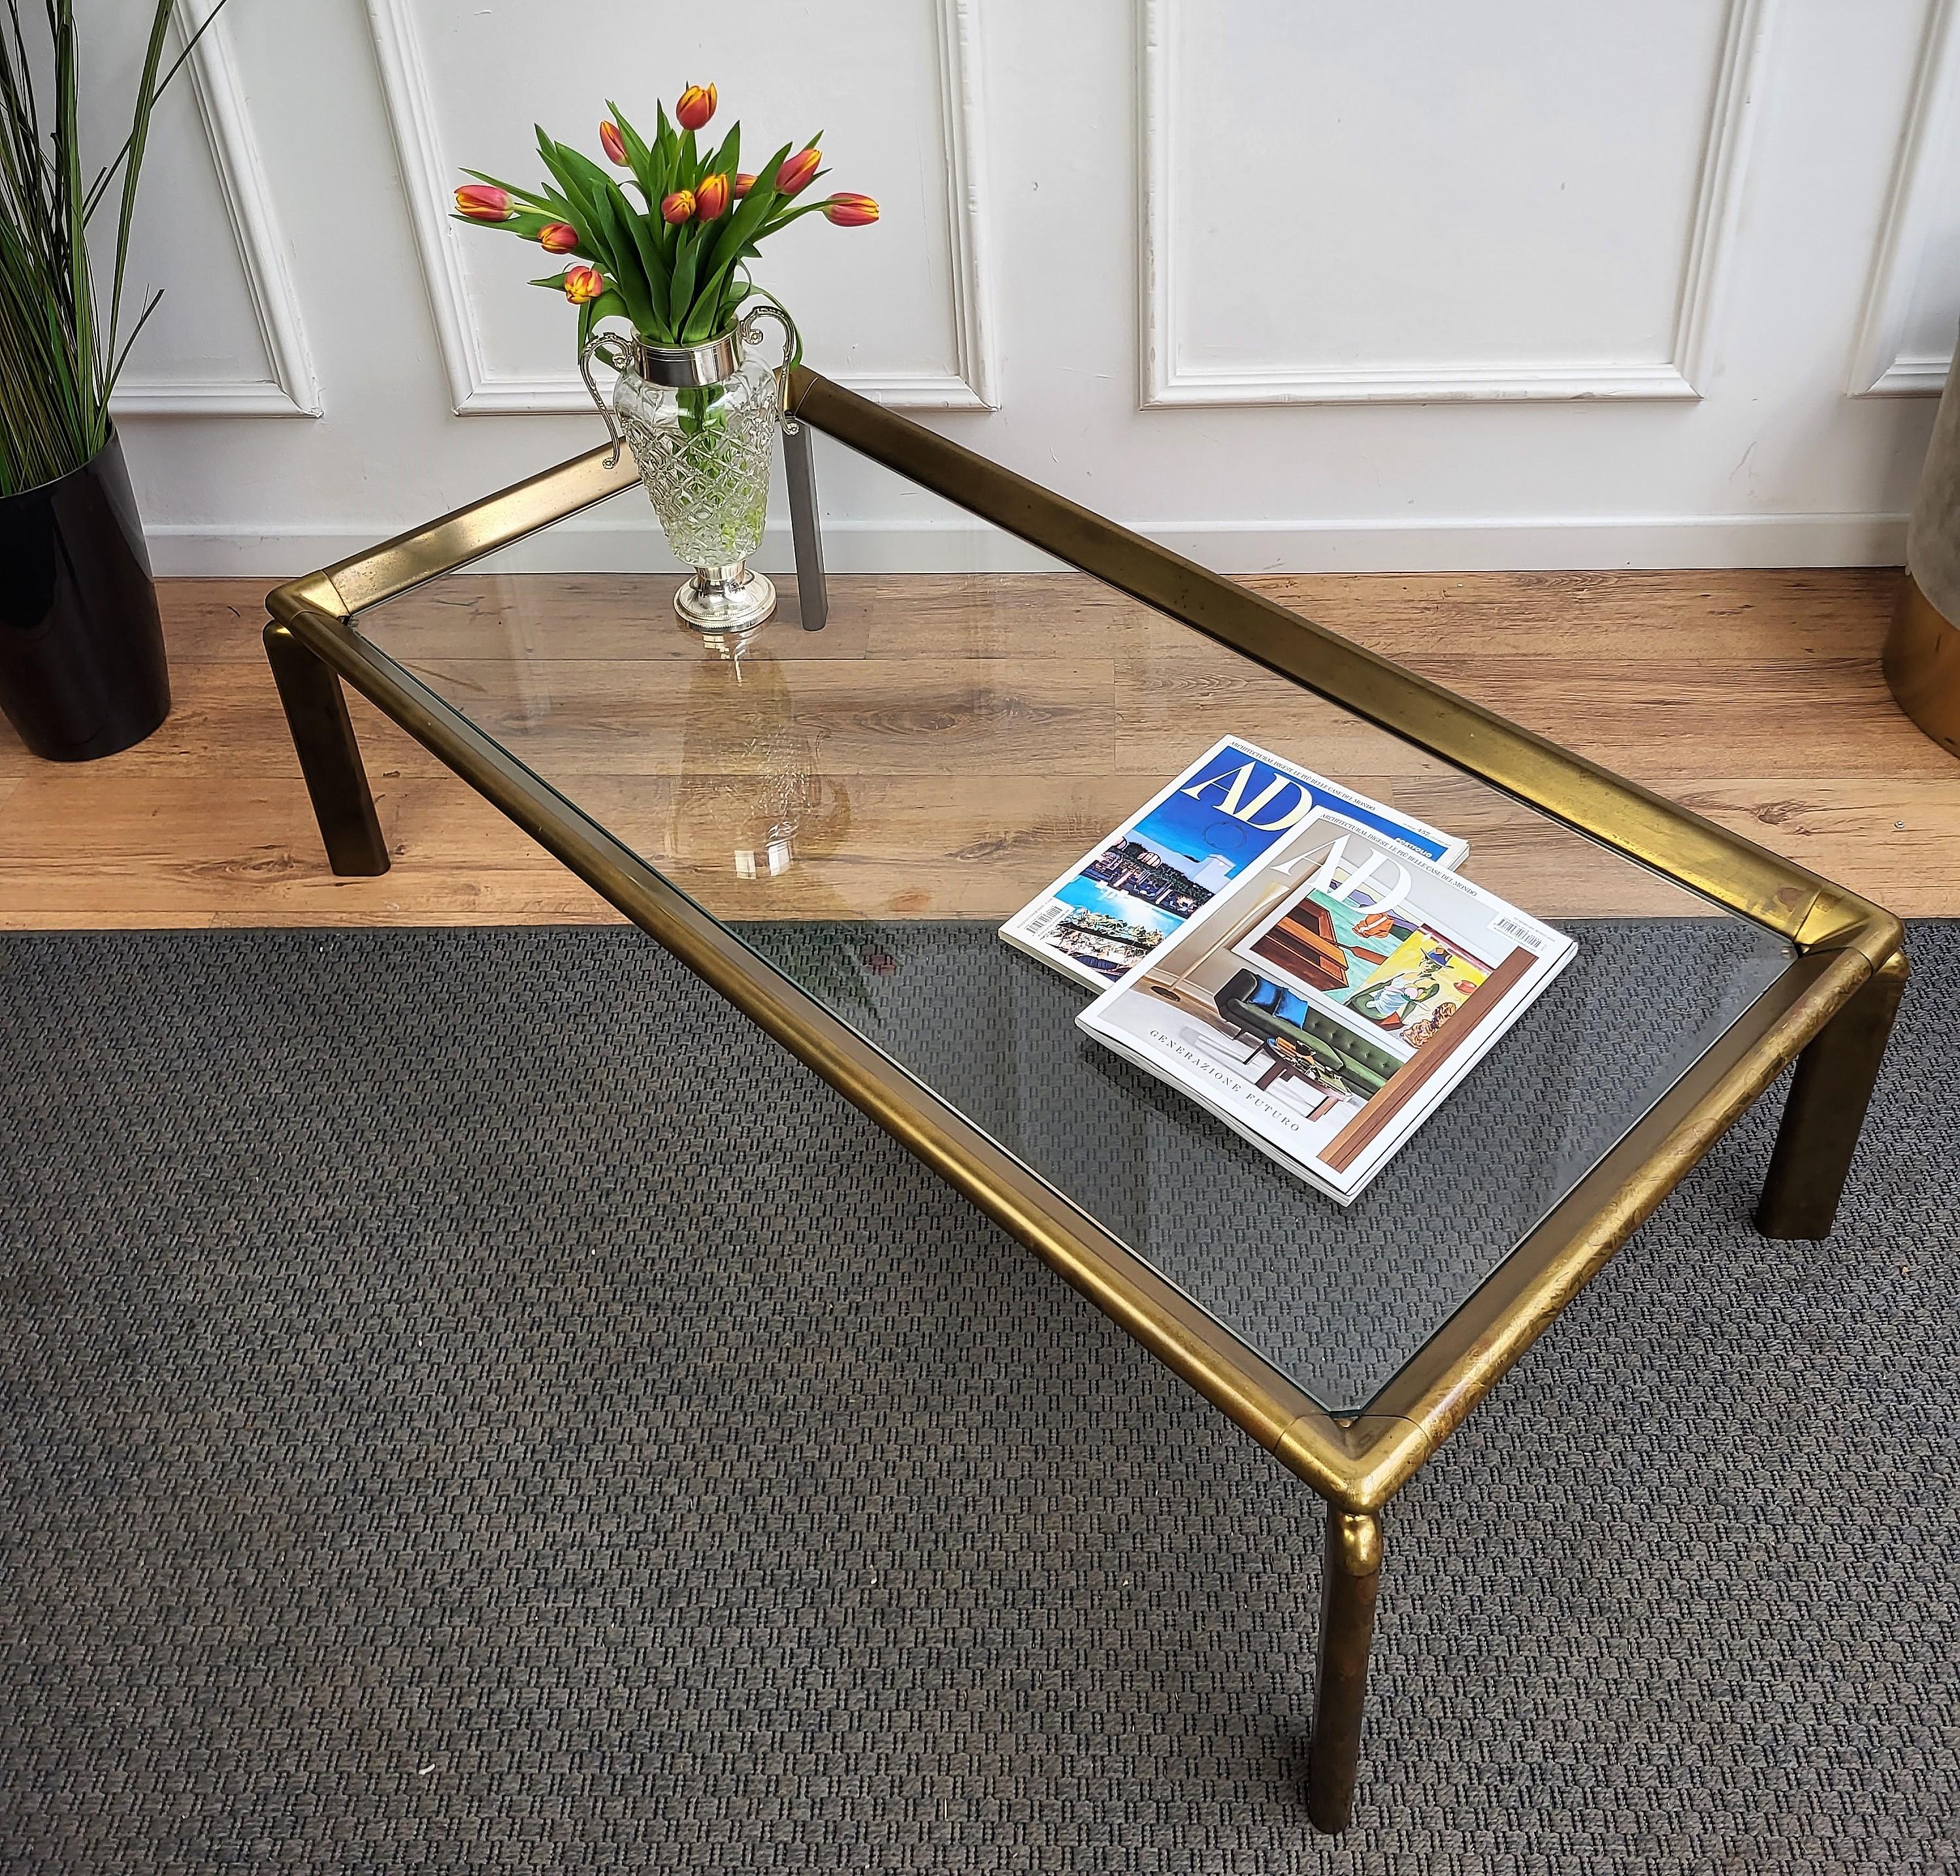 Beautiful and stylish vintage 1980s Italian brass and glass side table or coffee table or sofa table. Very good condition with great brass and glasses. A great piece that perfectly adds to every home decor the typical glitz, glamour and gold of